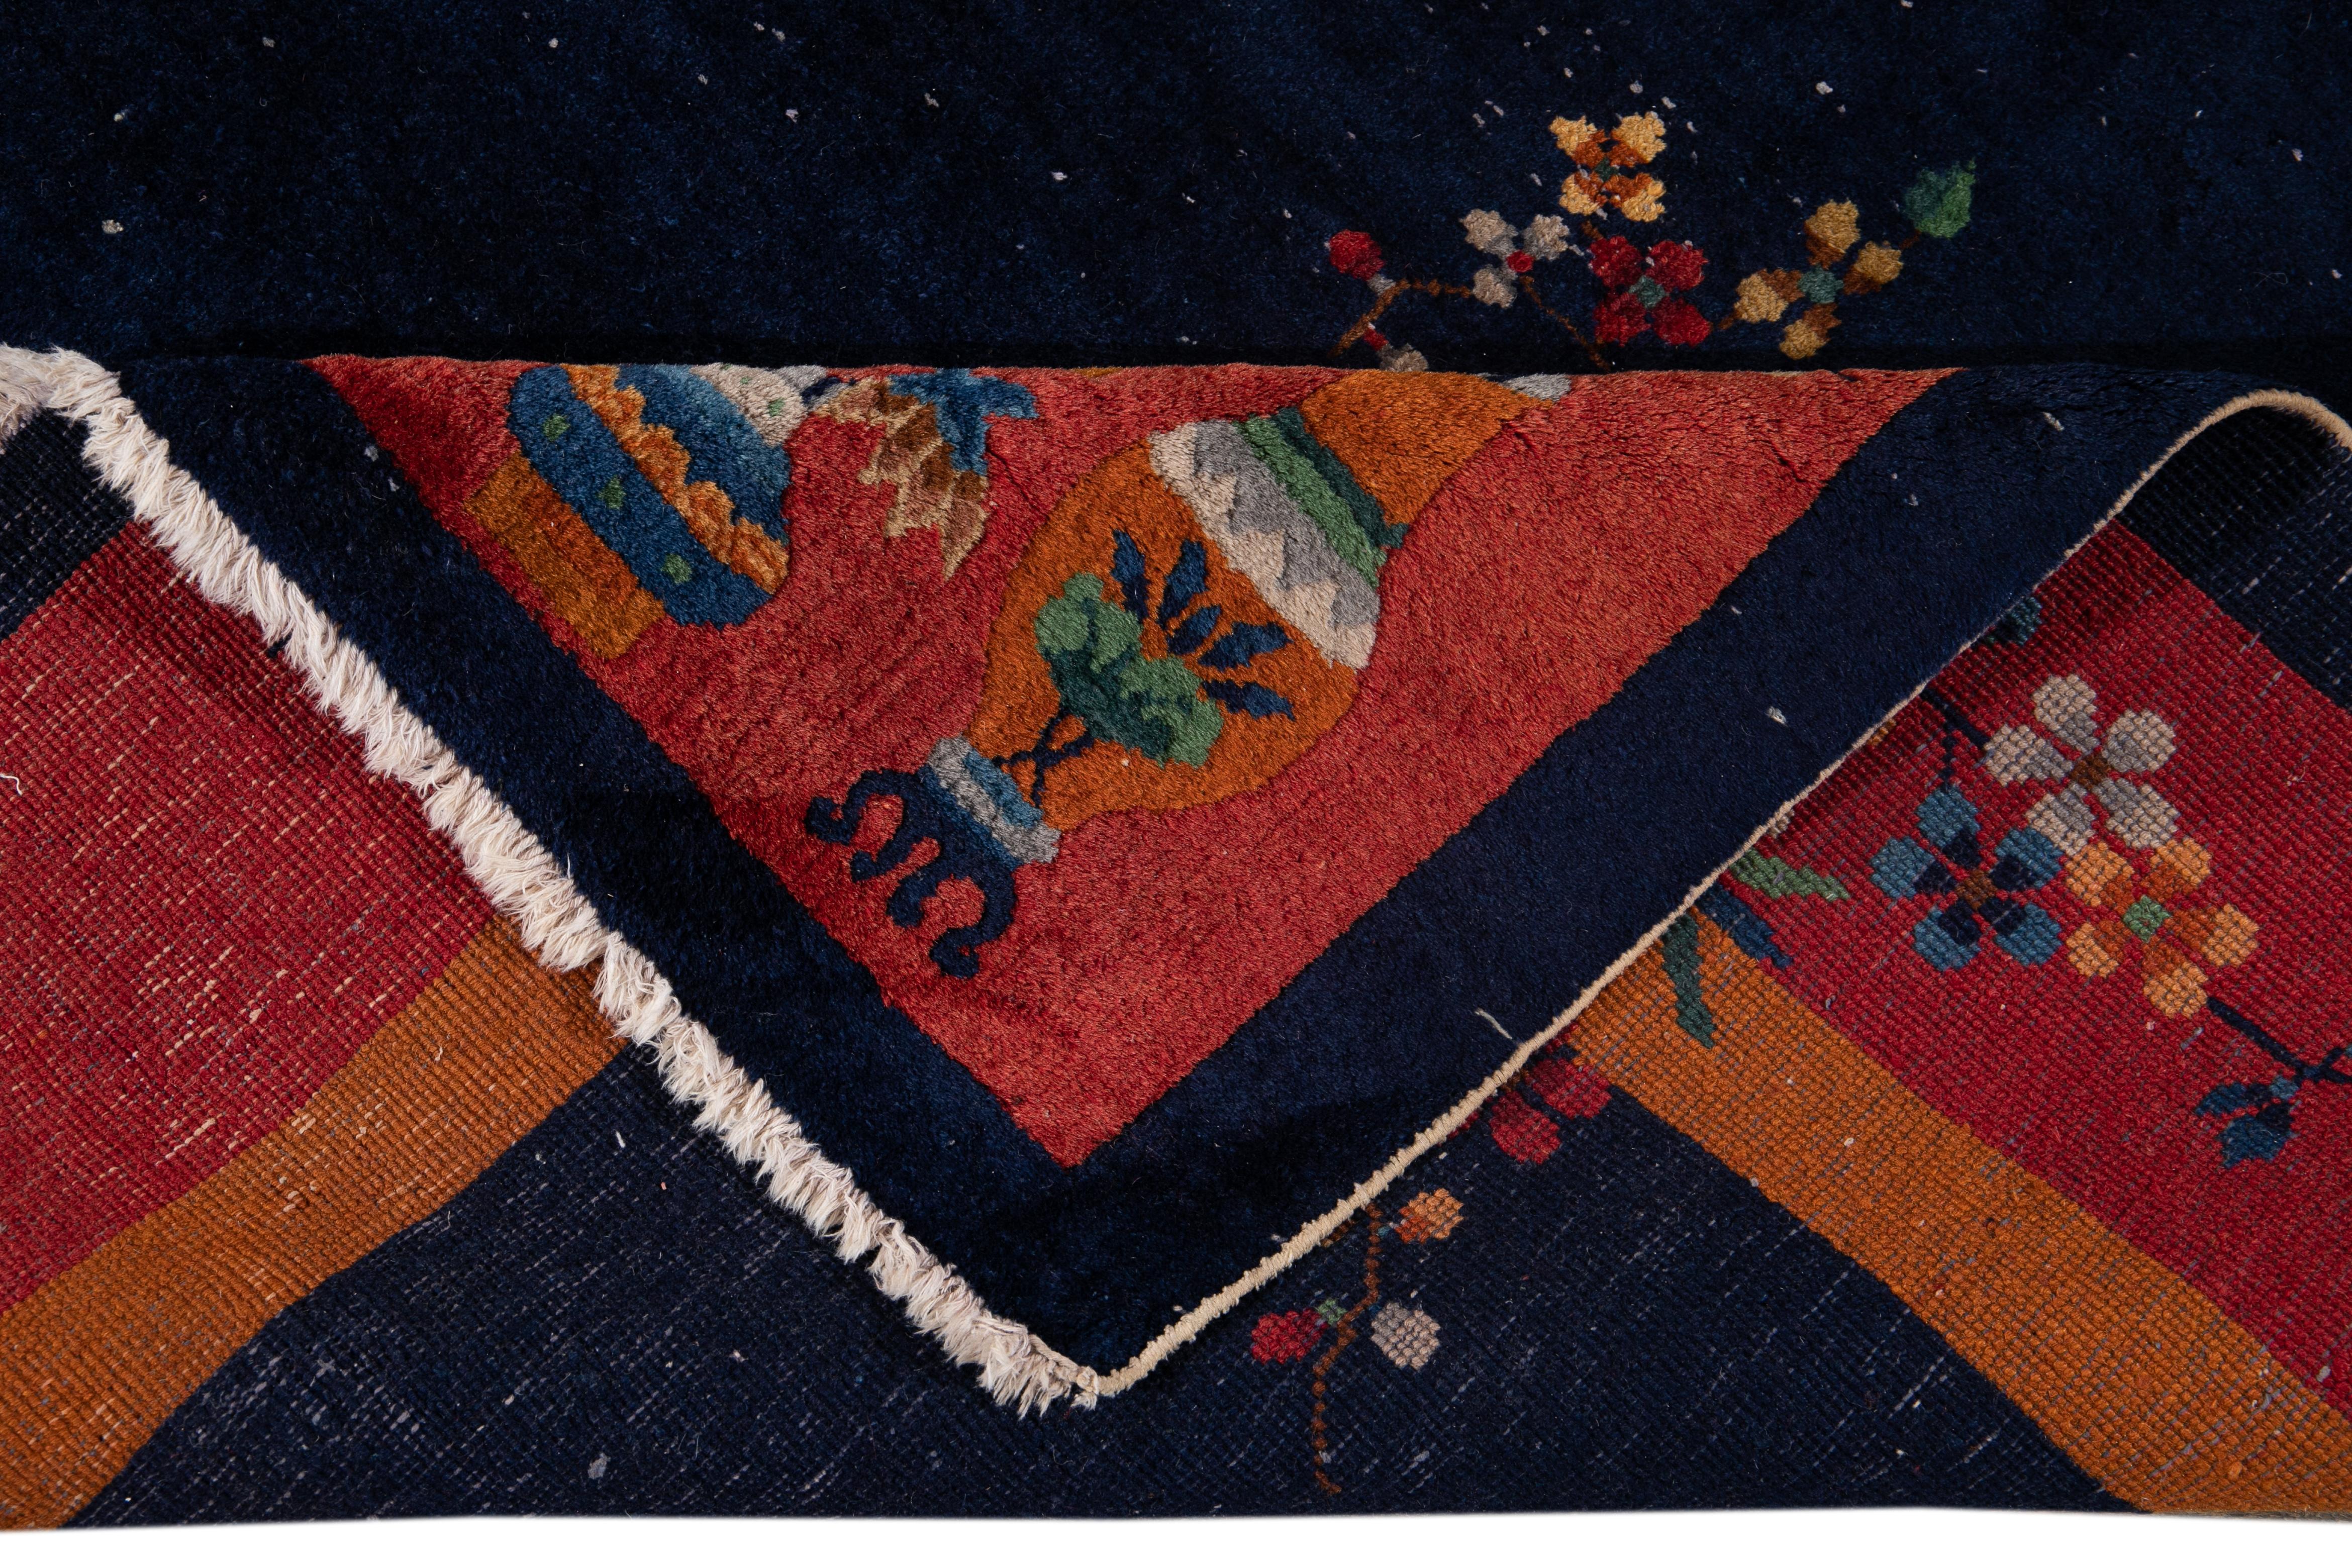 Beautiful antique Chinese Art Deco rug, hand knotted wool with a dark-blue field, orange and red frame in a subtle all-over Classic Chinese floral design.
This rug measures: 7